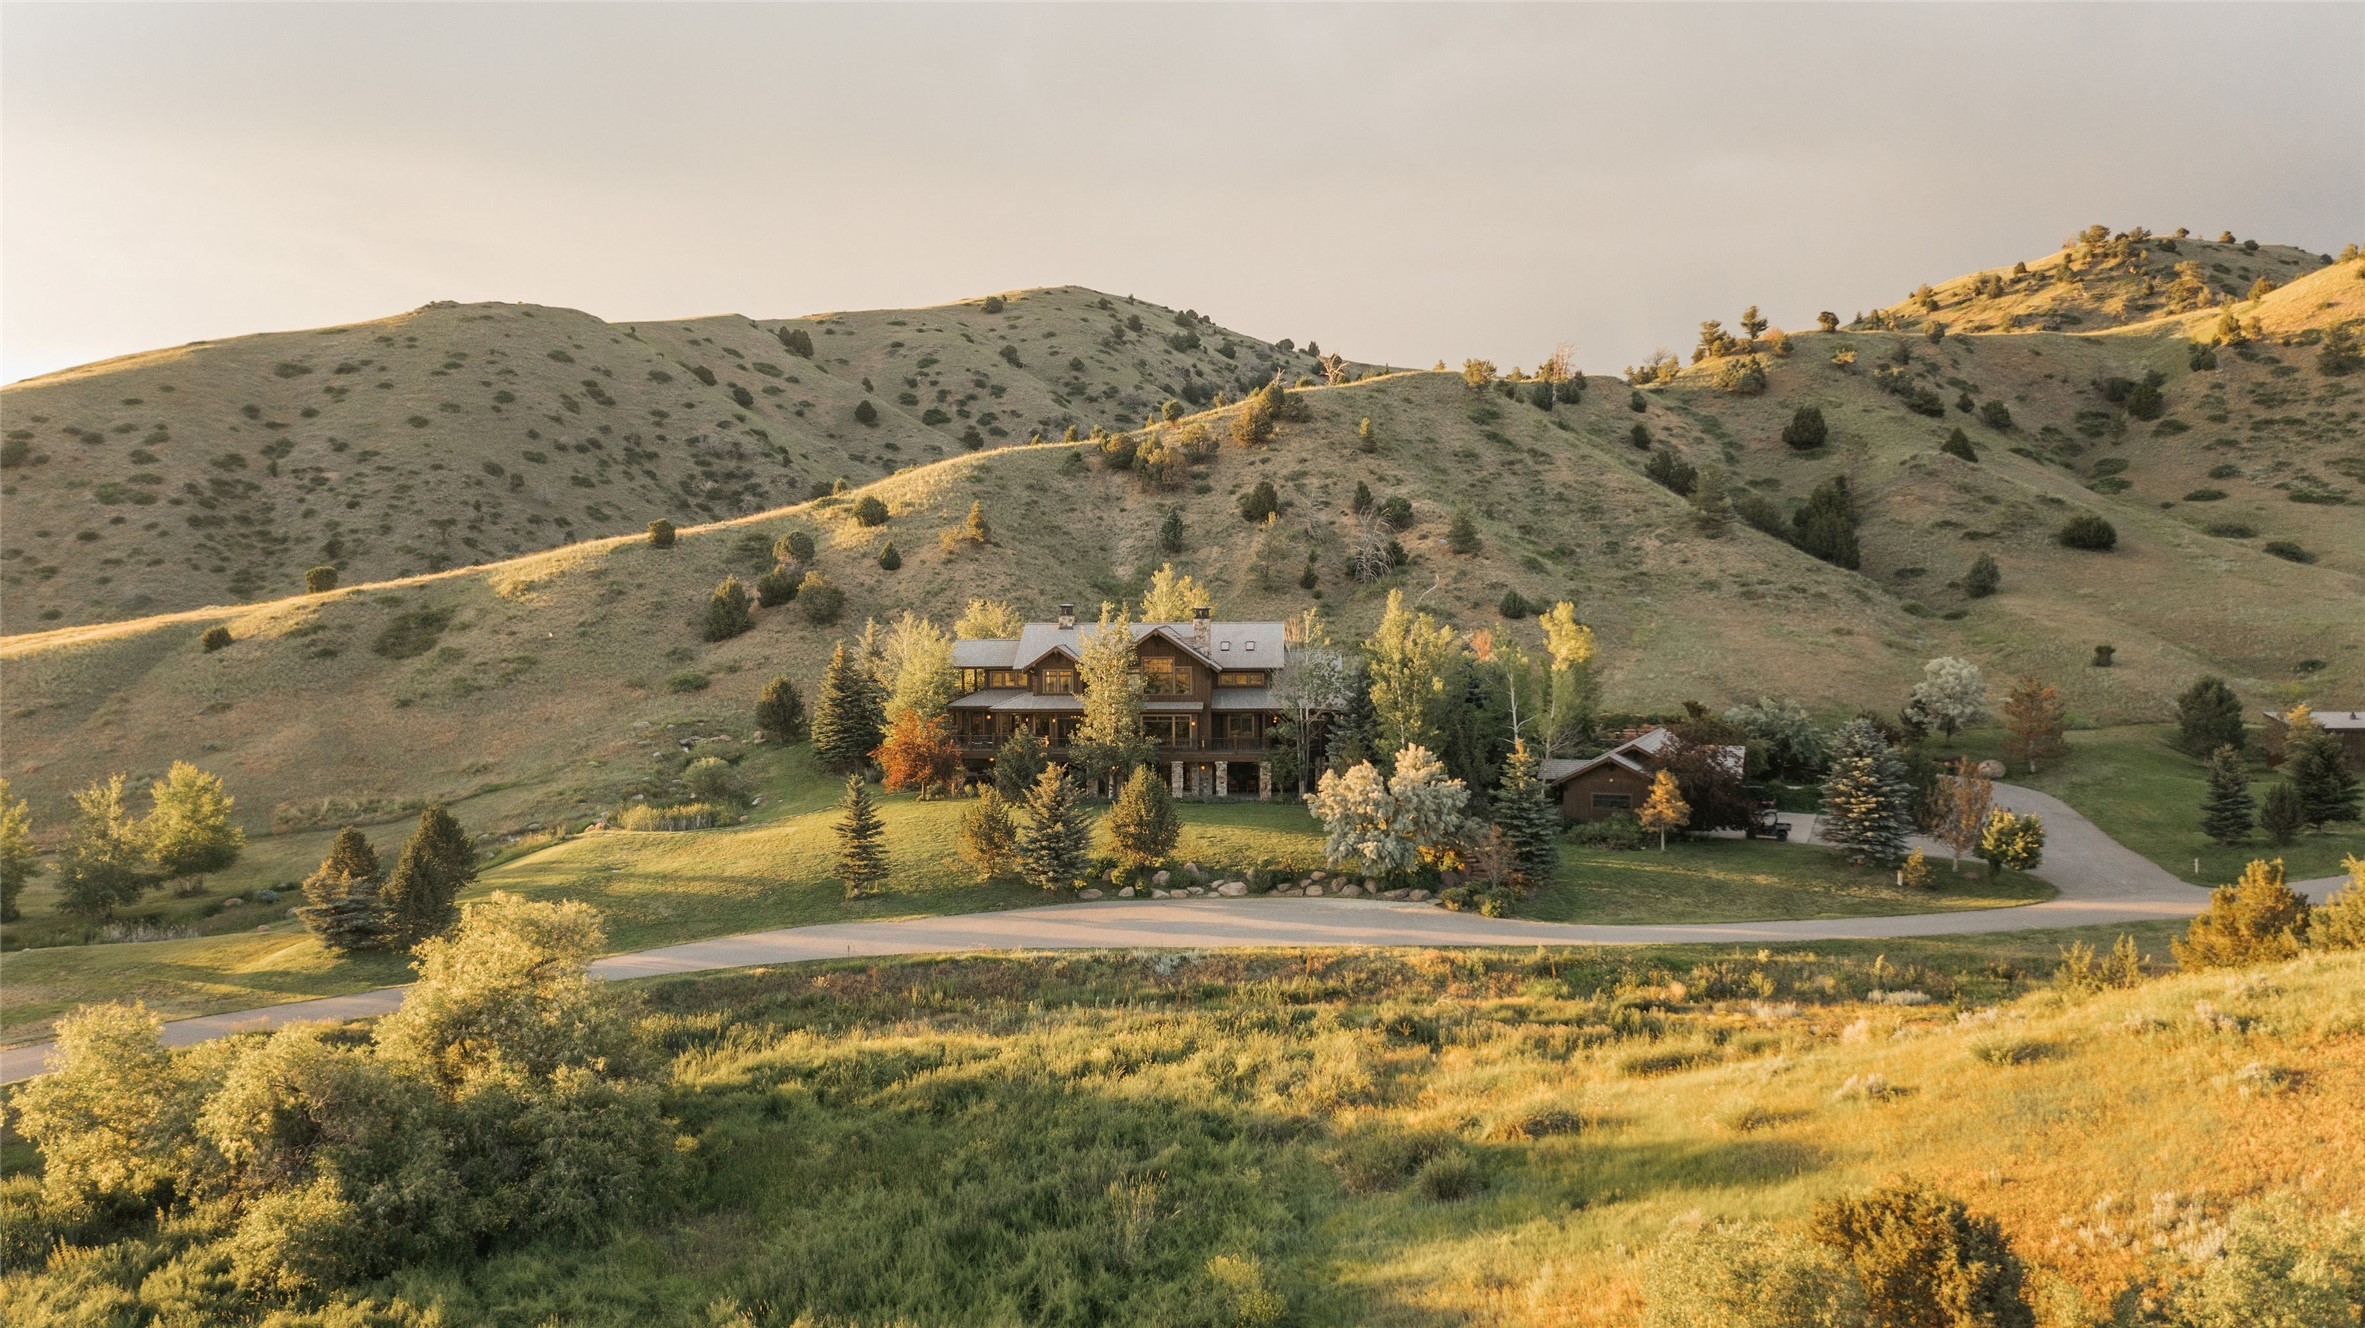 ~4,500 feet in elevation, the 6,220-acre (Apx # Acres Deeded: 5060) Grey Cliffs Ranch is situated on a varied landscape, featuring rolling hills, grasslands, and rangelands. Once upon a time, this property was a cattle ranch, when the property was purchased in 2003 the goal was restoration. Over time, native landscapes reemerged after planting thousands of acres of grasslands and trees, creating wetland protection with fencing to protect springs from livestock and reviving wildlife habitats for deer, elk, and upland birds including; wild sharp-tailed grouse, Hungarian partridge, pheasant, and chukar partridge. Two spring-fed trout fishing ponds are located on the property and the Madison River - Greycliff Fishing access site is a short drive away for additional recreational opportunities. The avid horseman can enjoy the indoor riding arena, and roughly 1,000-acre fenced grounds with running water for livestock. The property is currently farmed and watered by pivots. WATER RIGHTS CONVEY Apx # Cultivated Acres: 1184 
Apx # Acres Deeded: 5060
Apx # Acres Leased: 1160
Public Land Adjacent:  BLM, State
Crop/Crop Yield: Barley, Spring Wheat, Spr

 AS MUCH NOTICE AS POSSIBLE. MUST HAVE PRE-APPROVAL/PROOF OF FUNDS